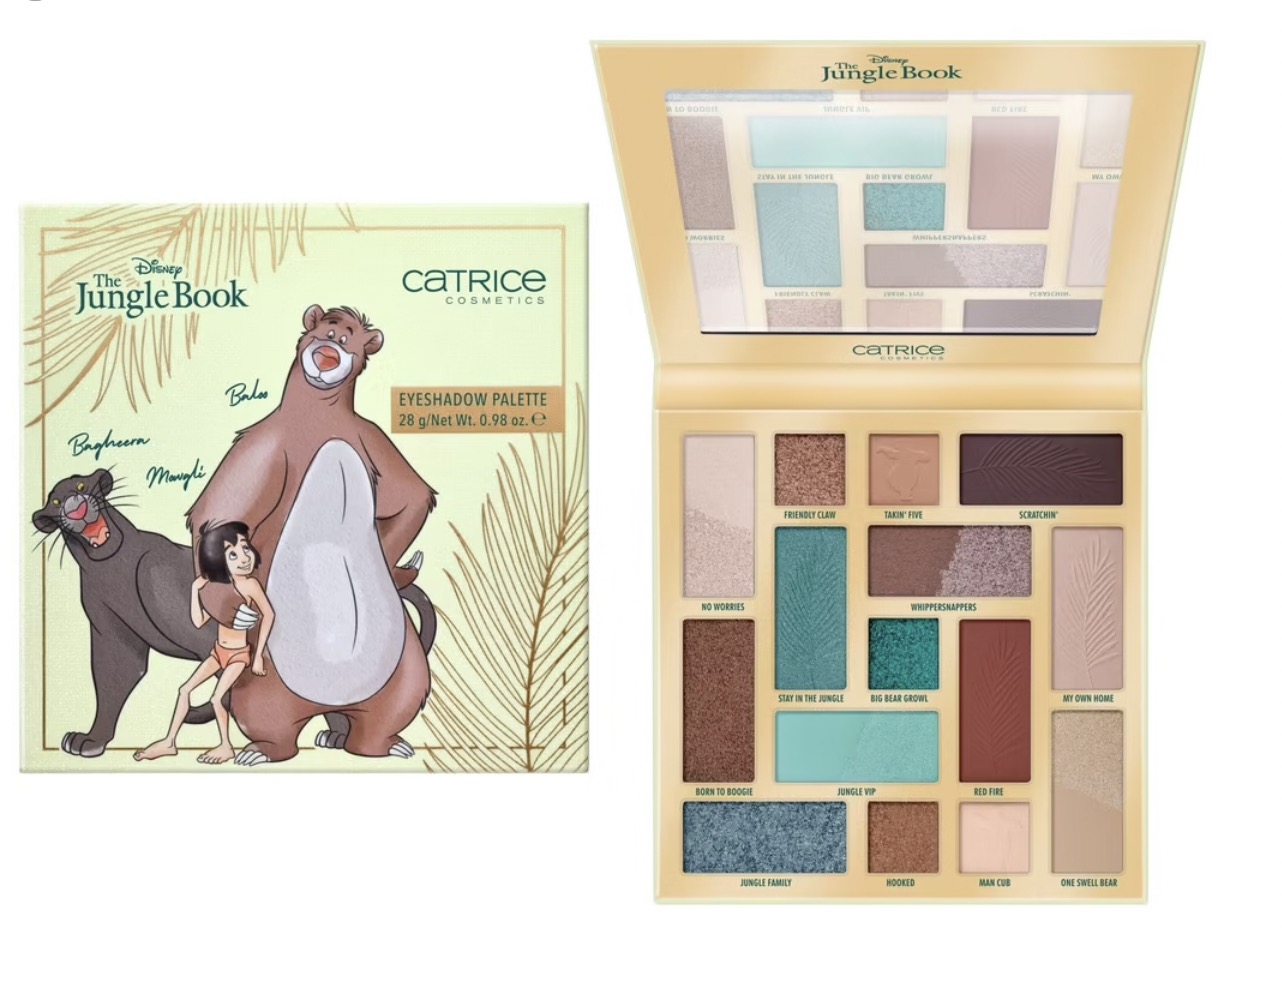 Catrice collection Disney The Jungle Book